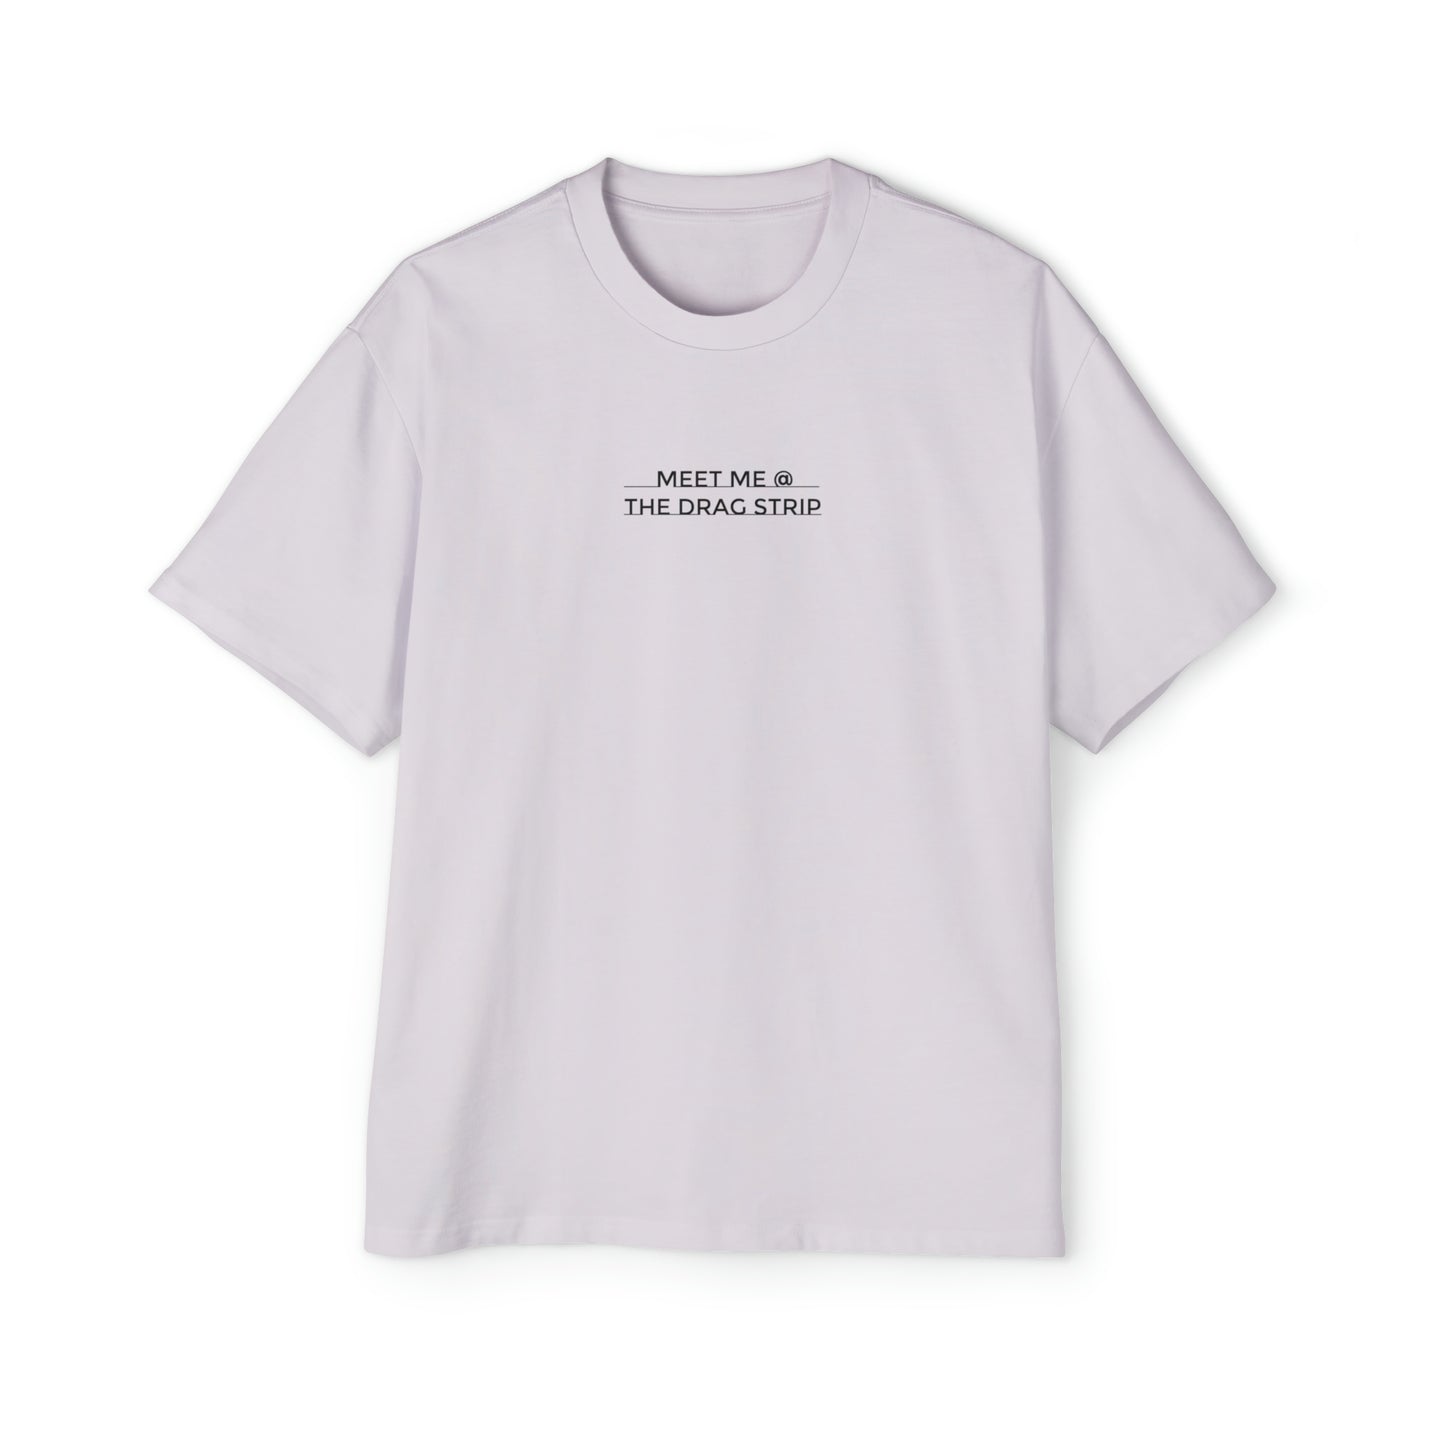 "Meet Me at the Drag Strip" Oversized Tee